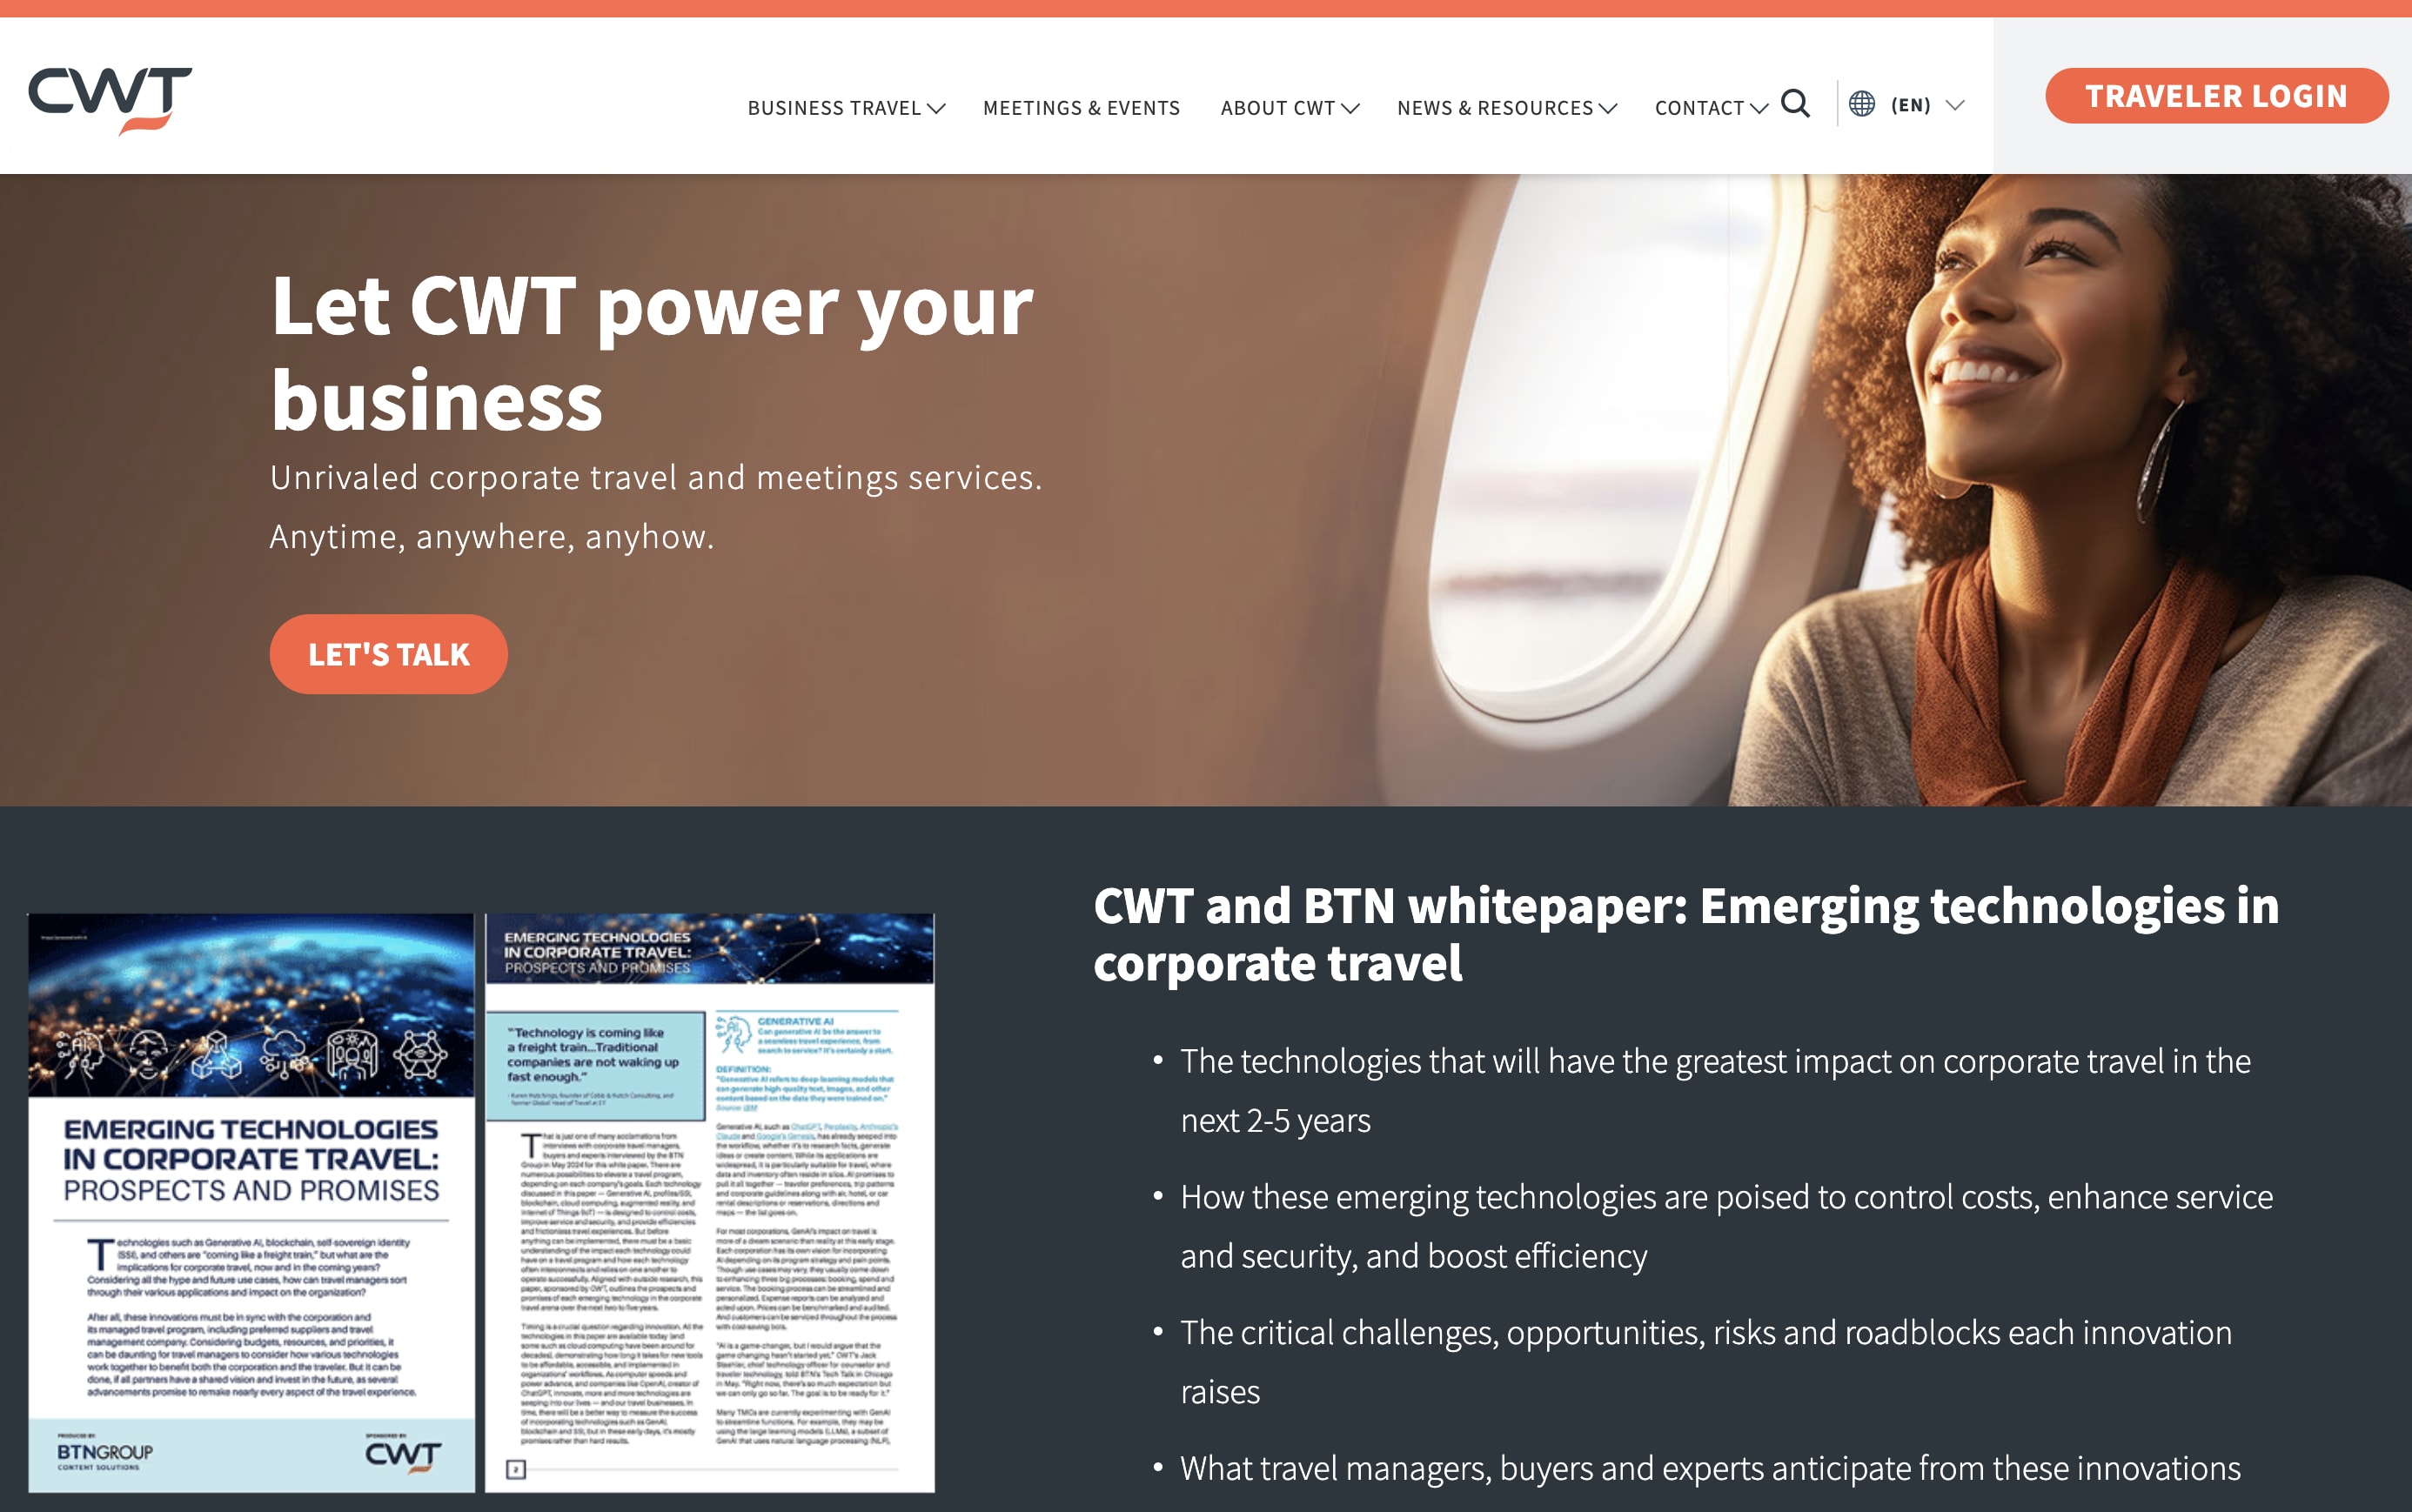 CWT is a B2B travel solution for companies looking to manage business travel.